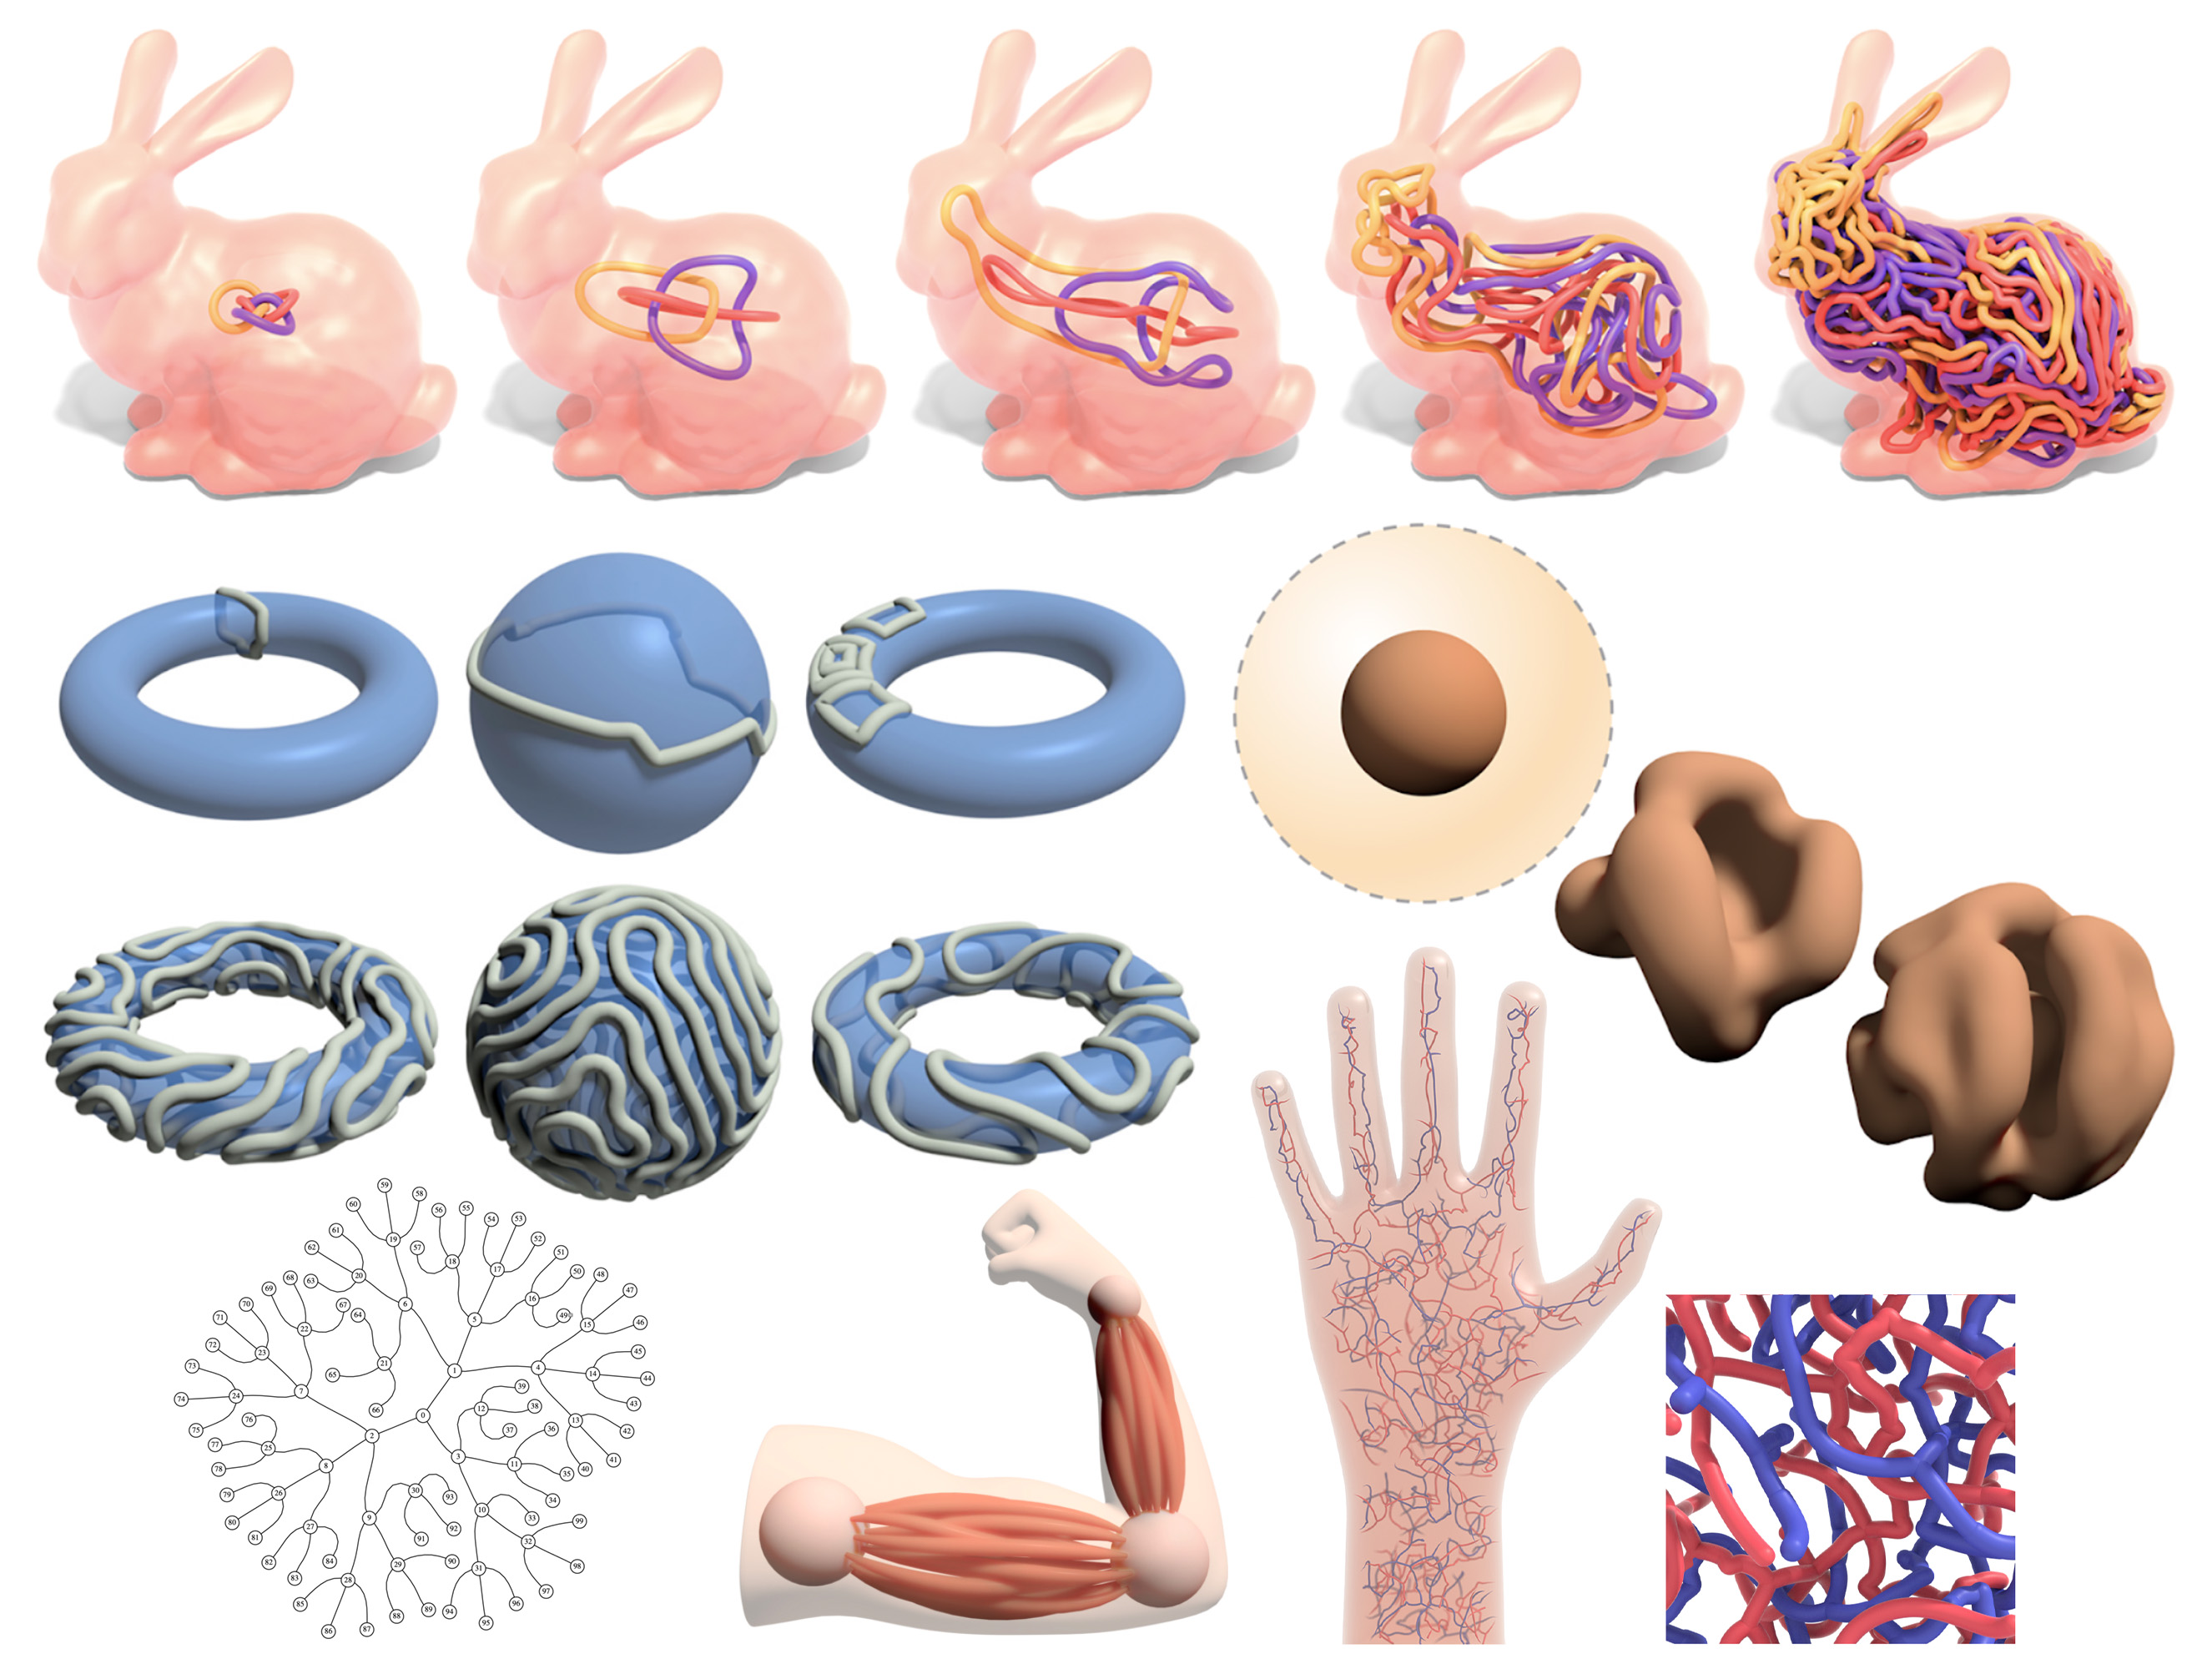 Different uses for repulsive forces to optimize shapes are depicted in a collage, including 3D models of the internal structure of a rabbit, the interior of a human hand, and muscles in a human arm.